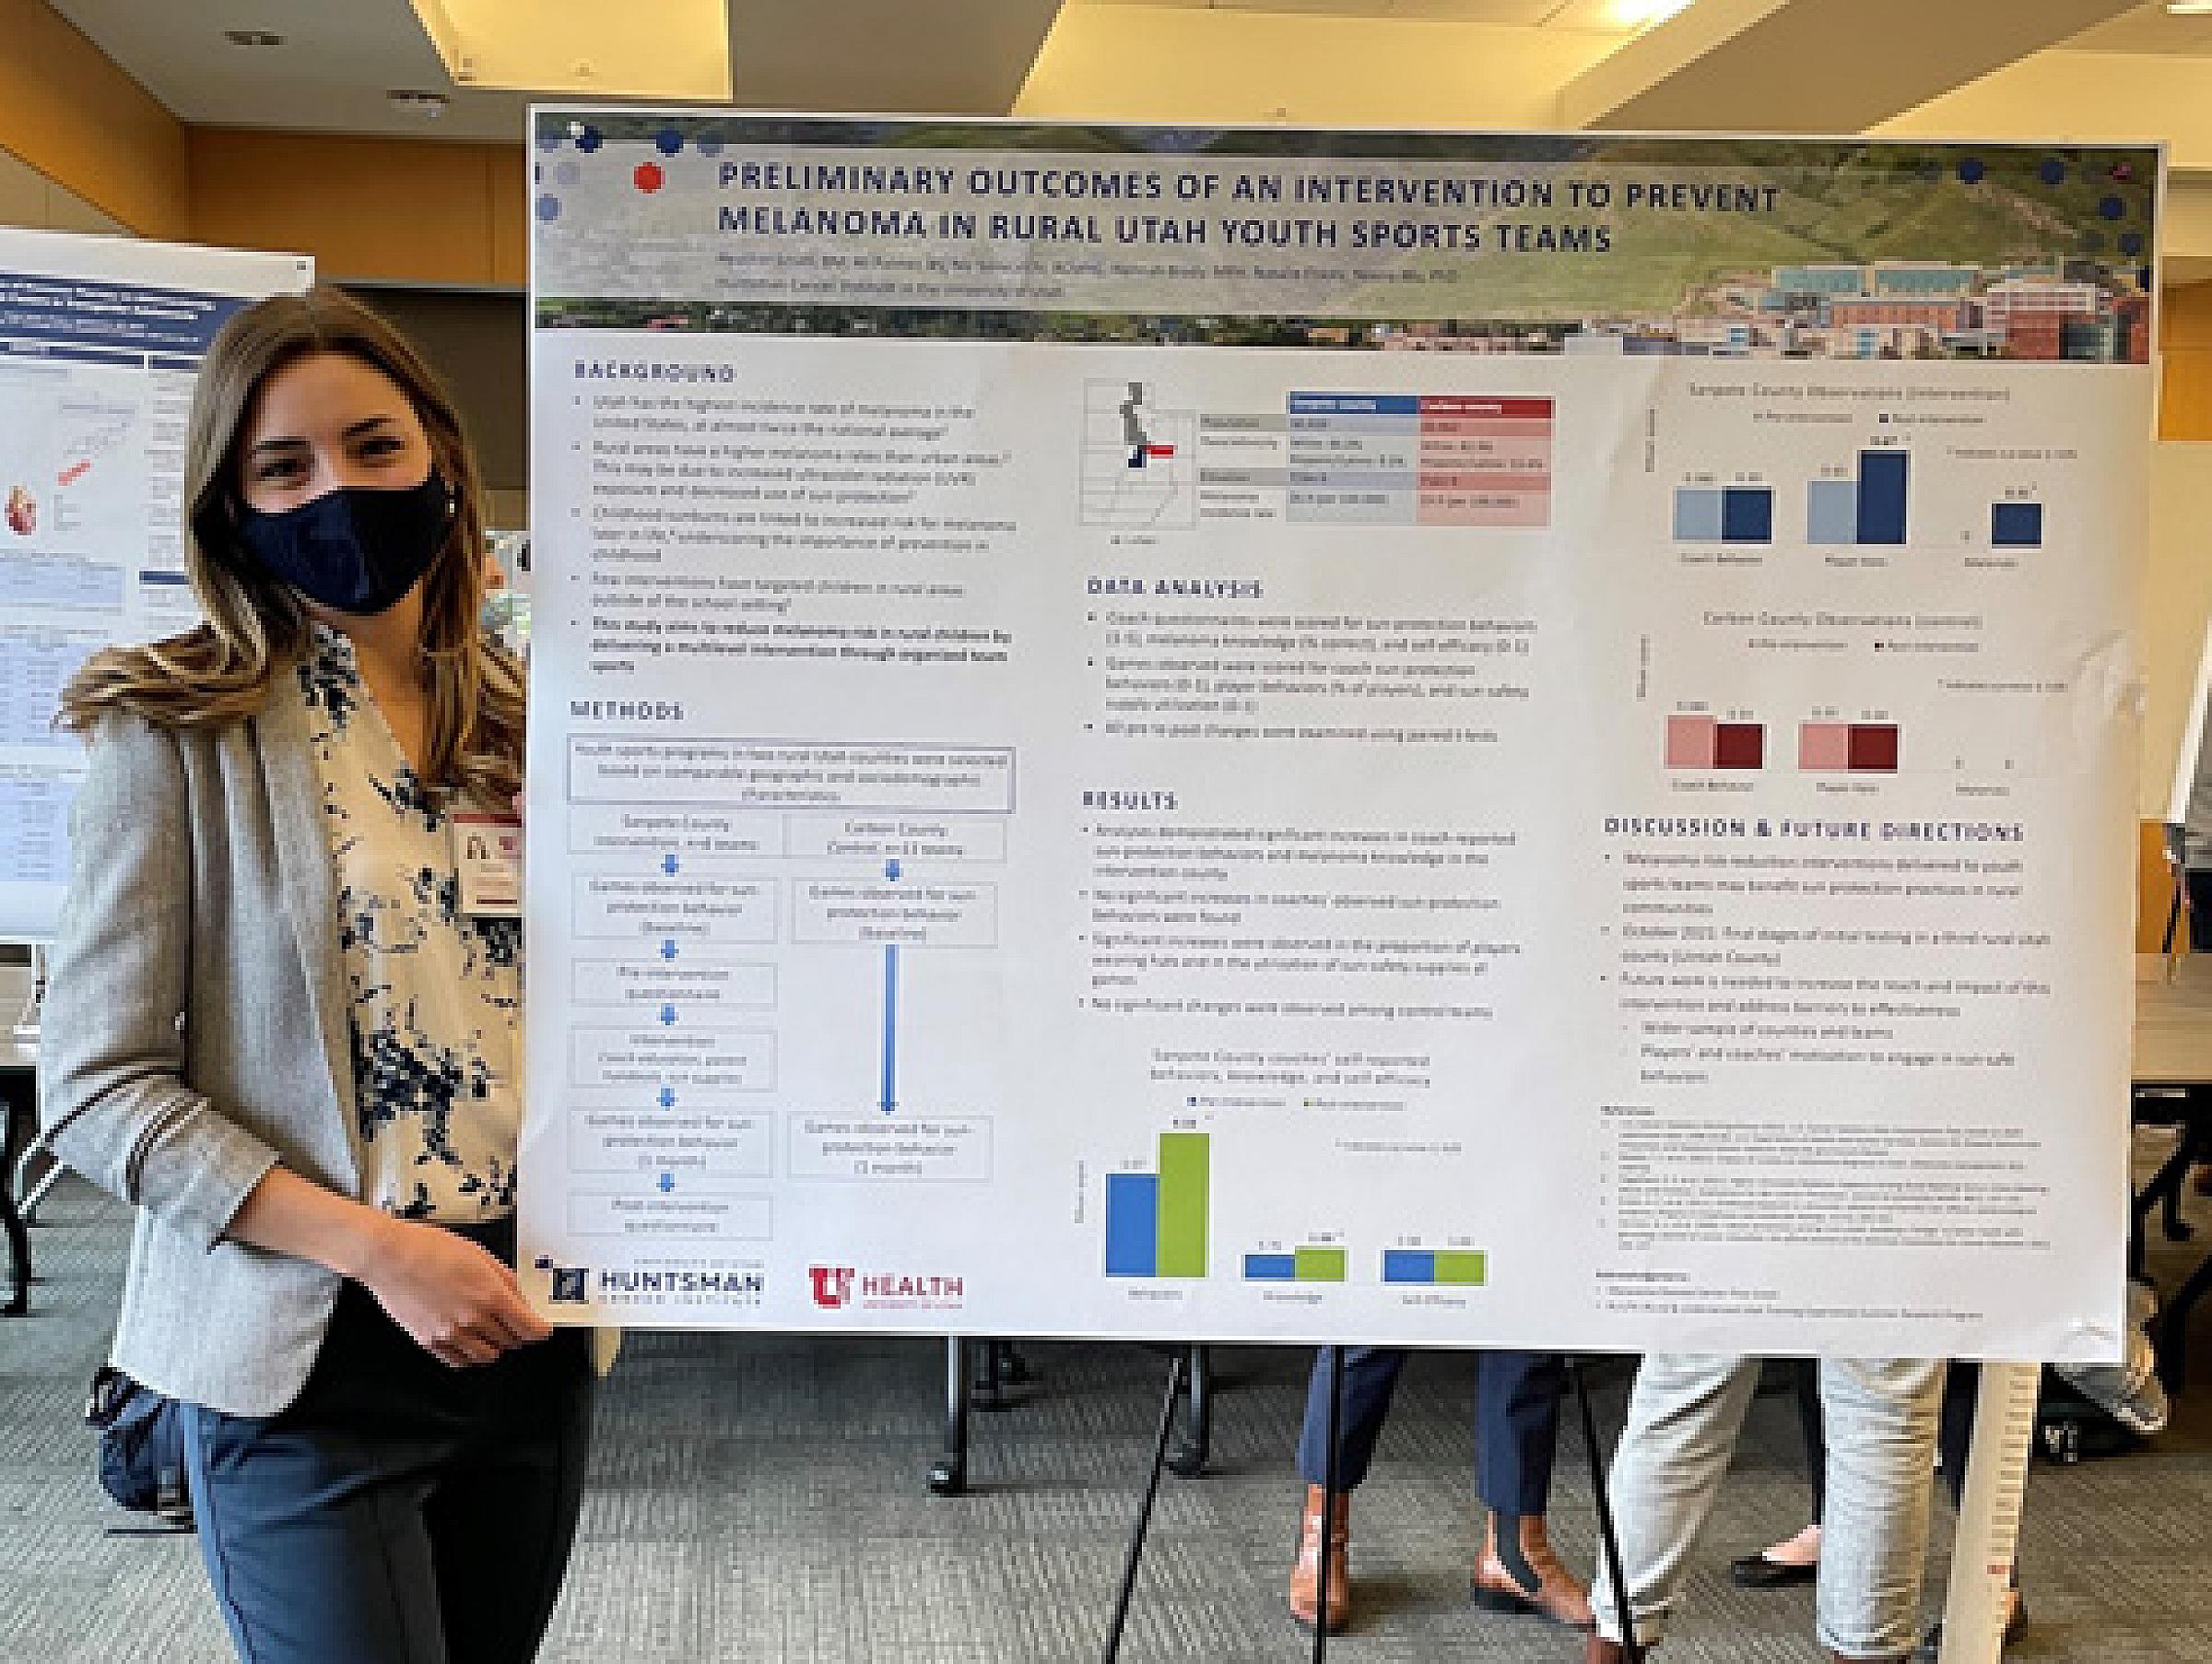 Heather Smith (medical student, participant in the RUUTE Summer Research Program in 2021) presented her work on the RAYS rural skin cancer prevention study for youths at the Medical Student Research Forum in October 2021.